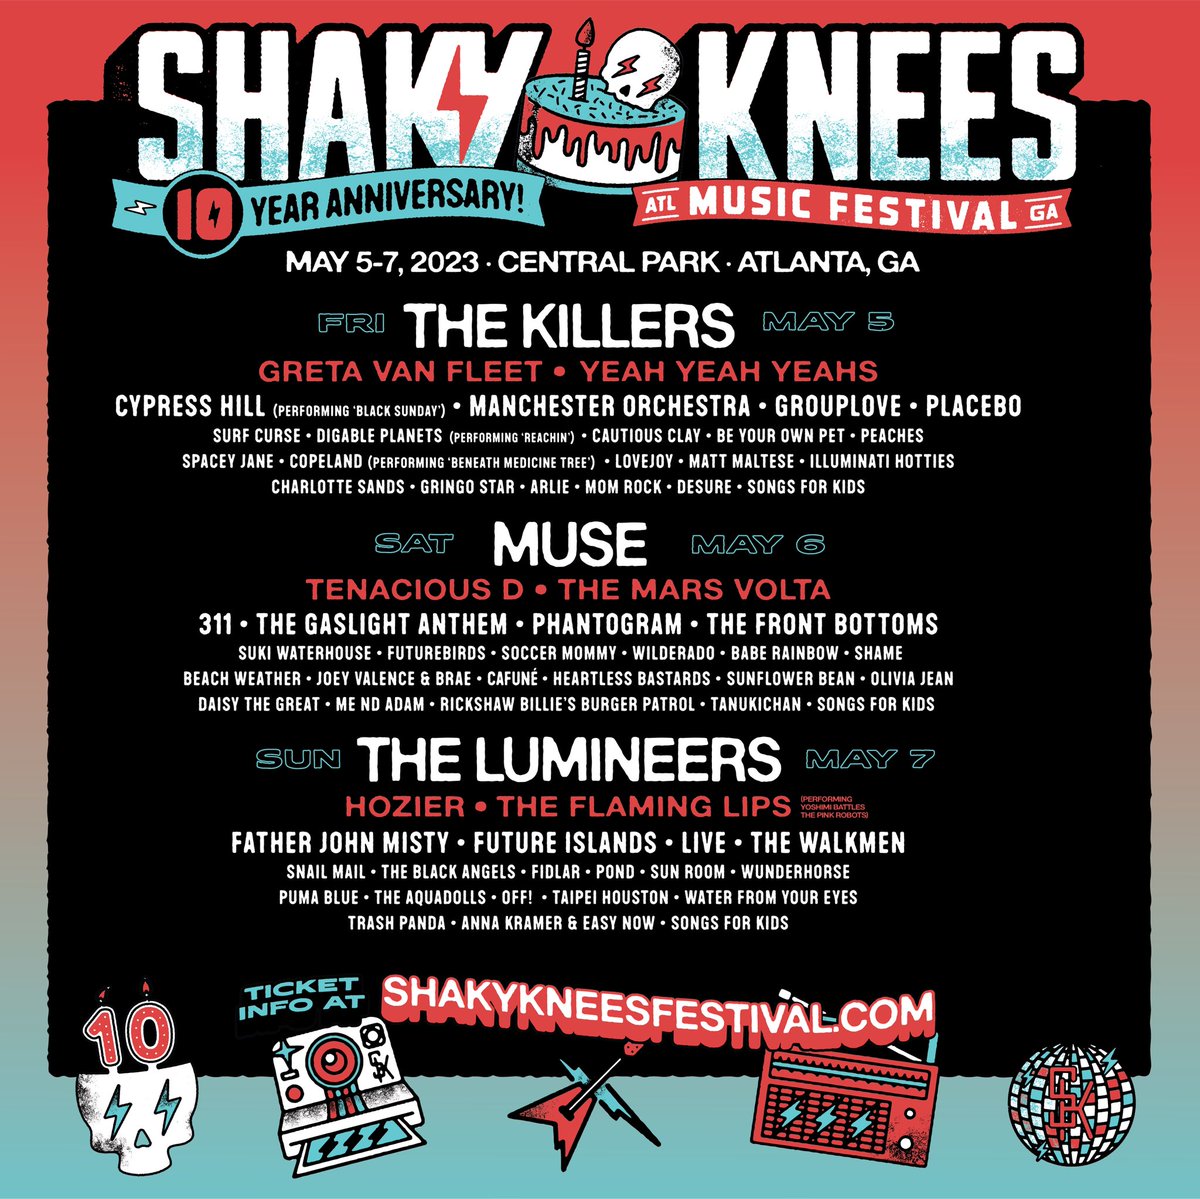 Get ready Atlanta, we’re celebrating the 10 Year Anniversary of @ShakyKneesFest on May 6th at Central Park! Tickets on sale now at shakykneesfestival.com